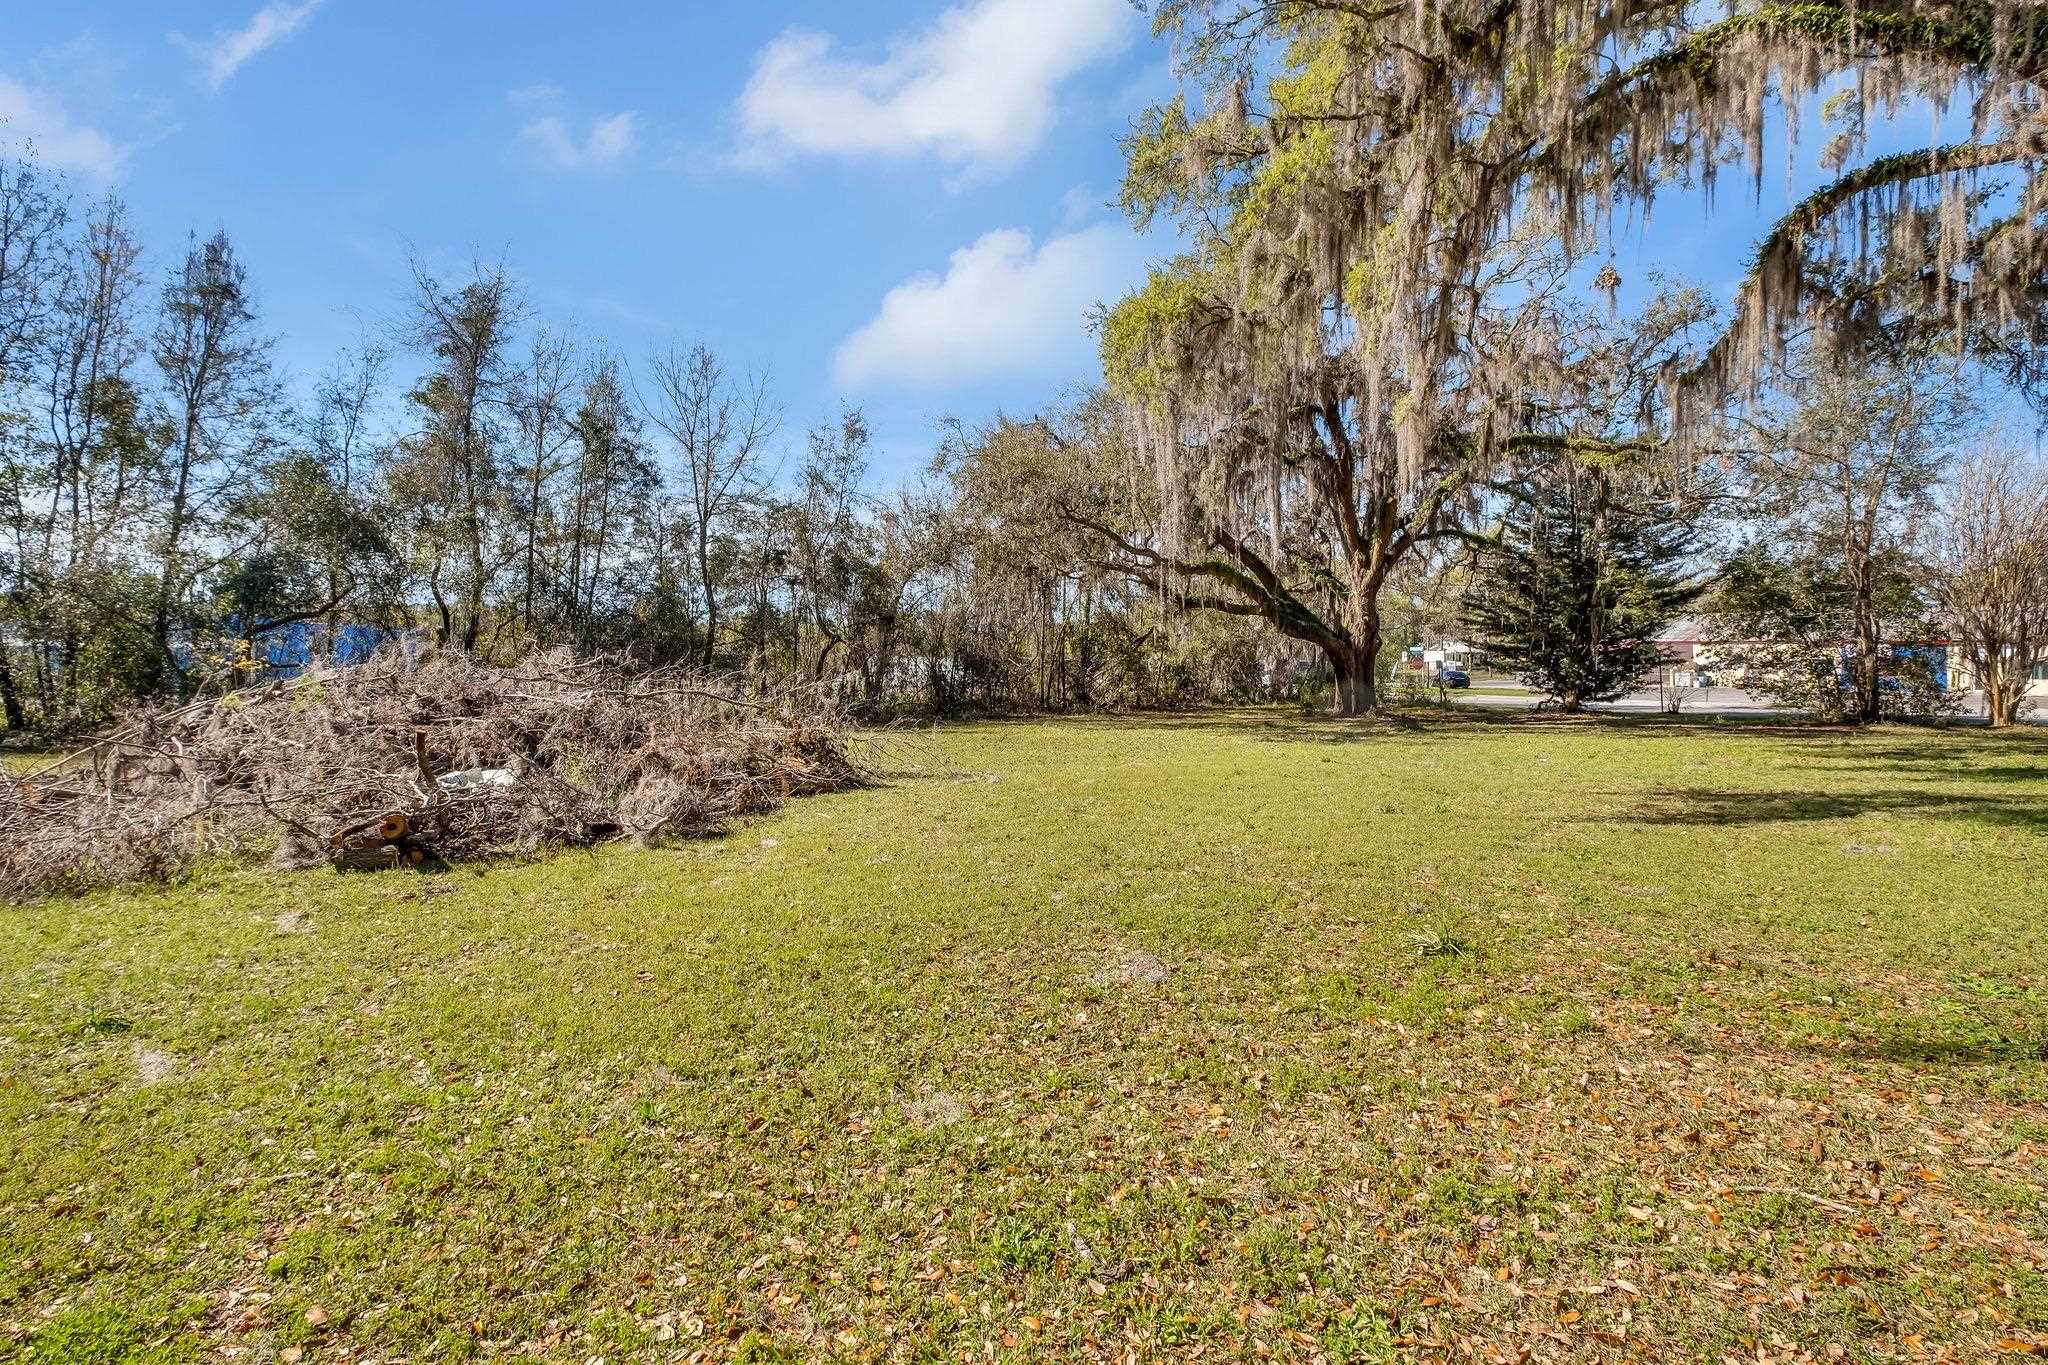 144 NE Rocky Ford Road,MADISON,Florida 32340,3 Bedrooms Bedrooms,2 BathroomsBathrooms,Detached single family,144 NE Rocky Ford Road,369912